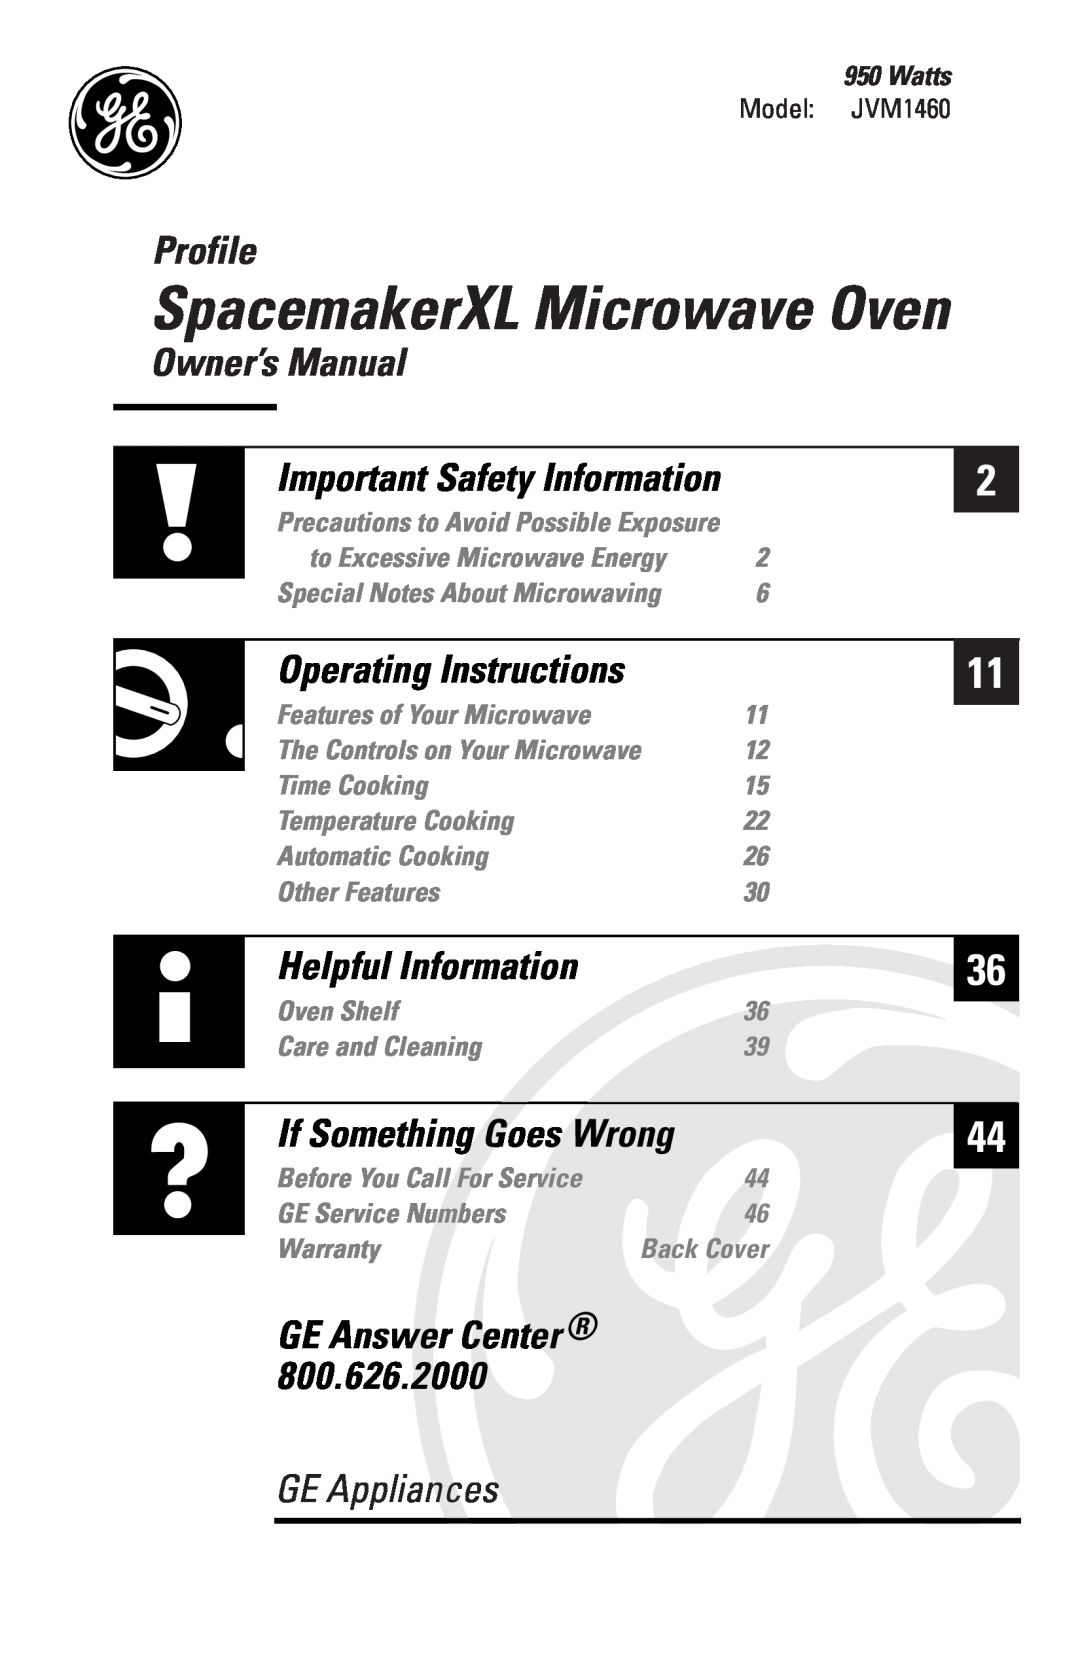 GE JVM1460 owner manual Profile, Owner’s Manual, Watts, SpacemakerXL Microwave Oven, GE Appliances, Operating Instructions 